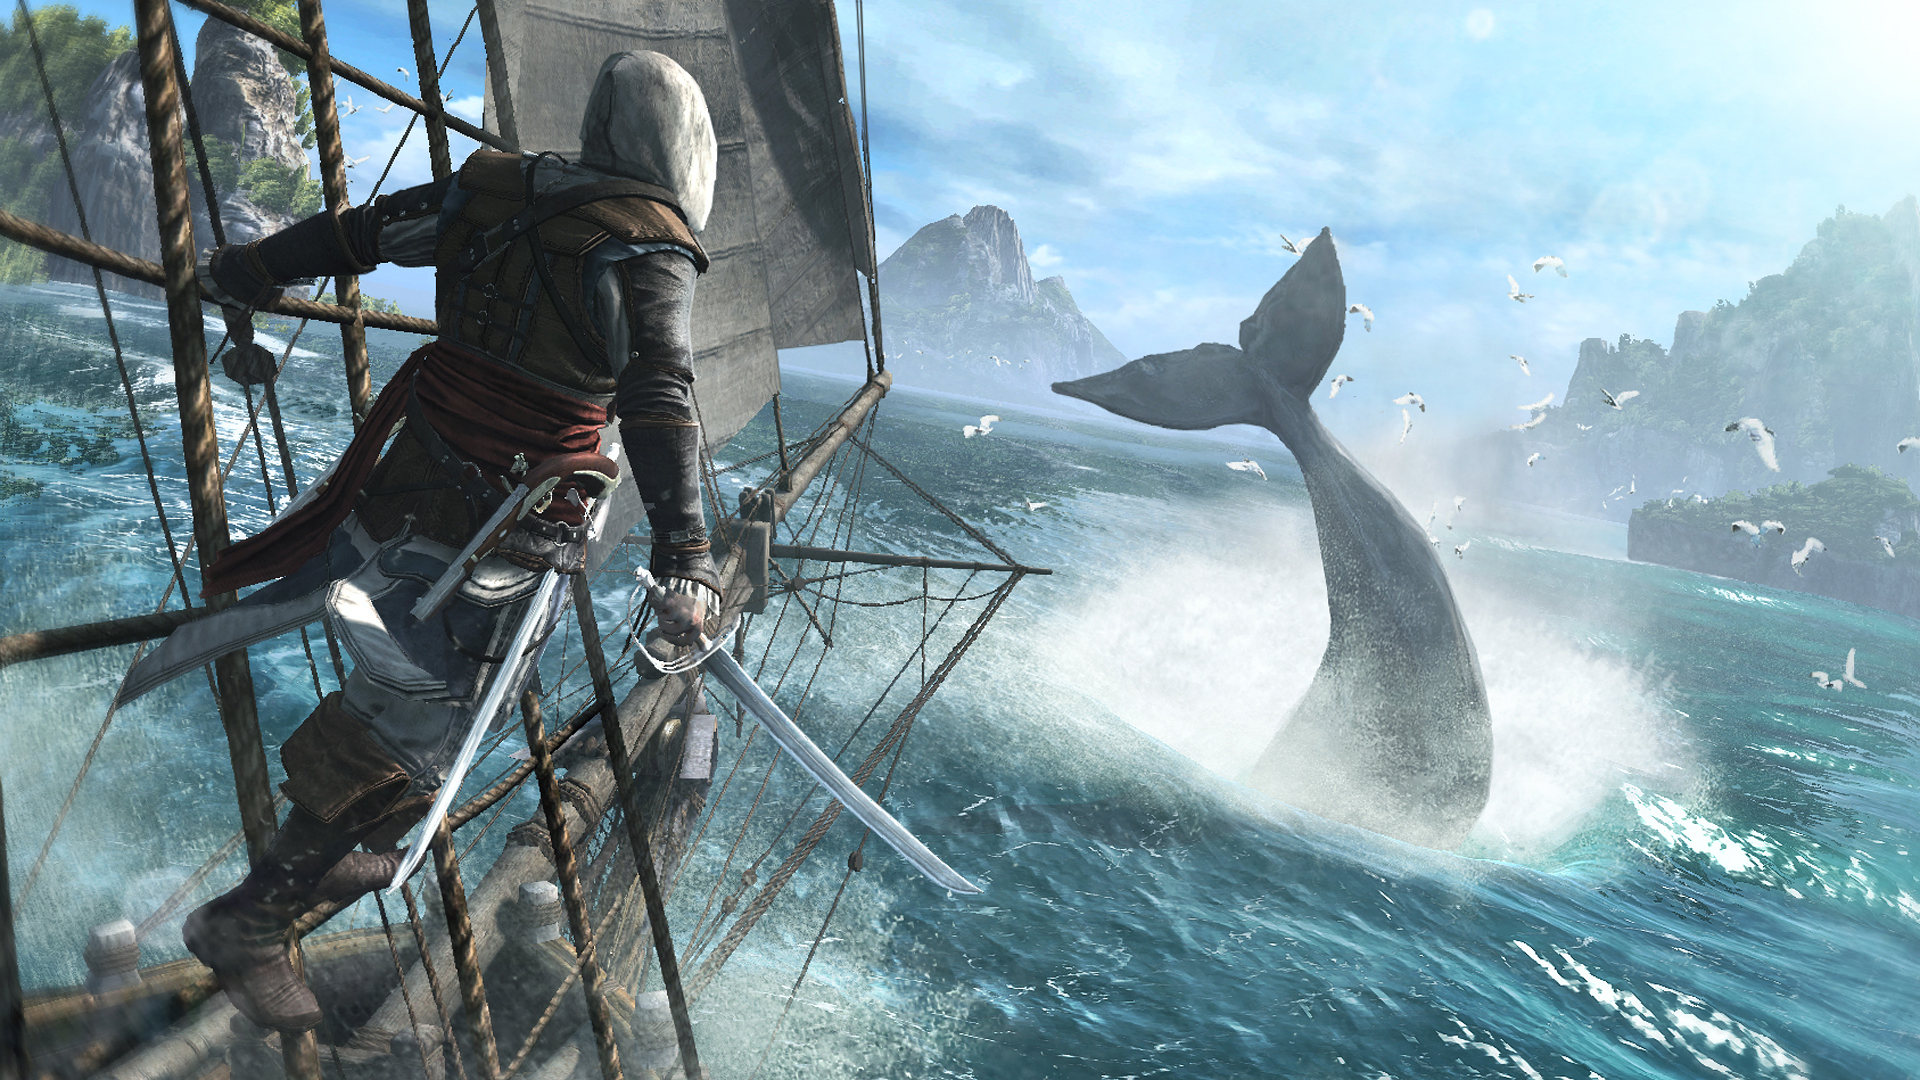 Assassins Creed IV Black Flag Trailer and Screenshots Leaked pic 6